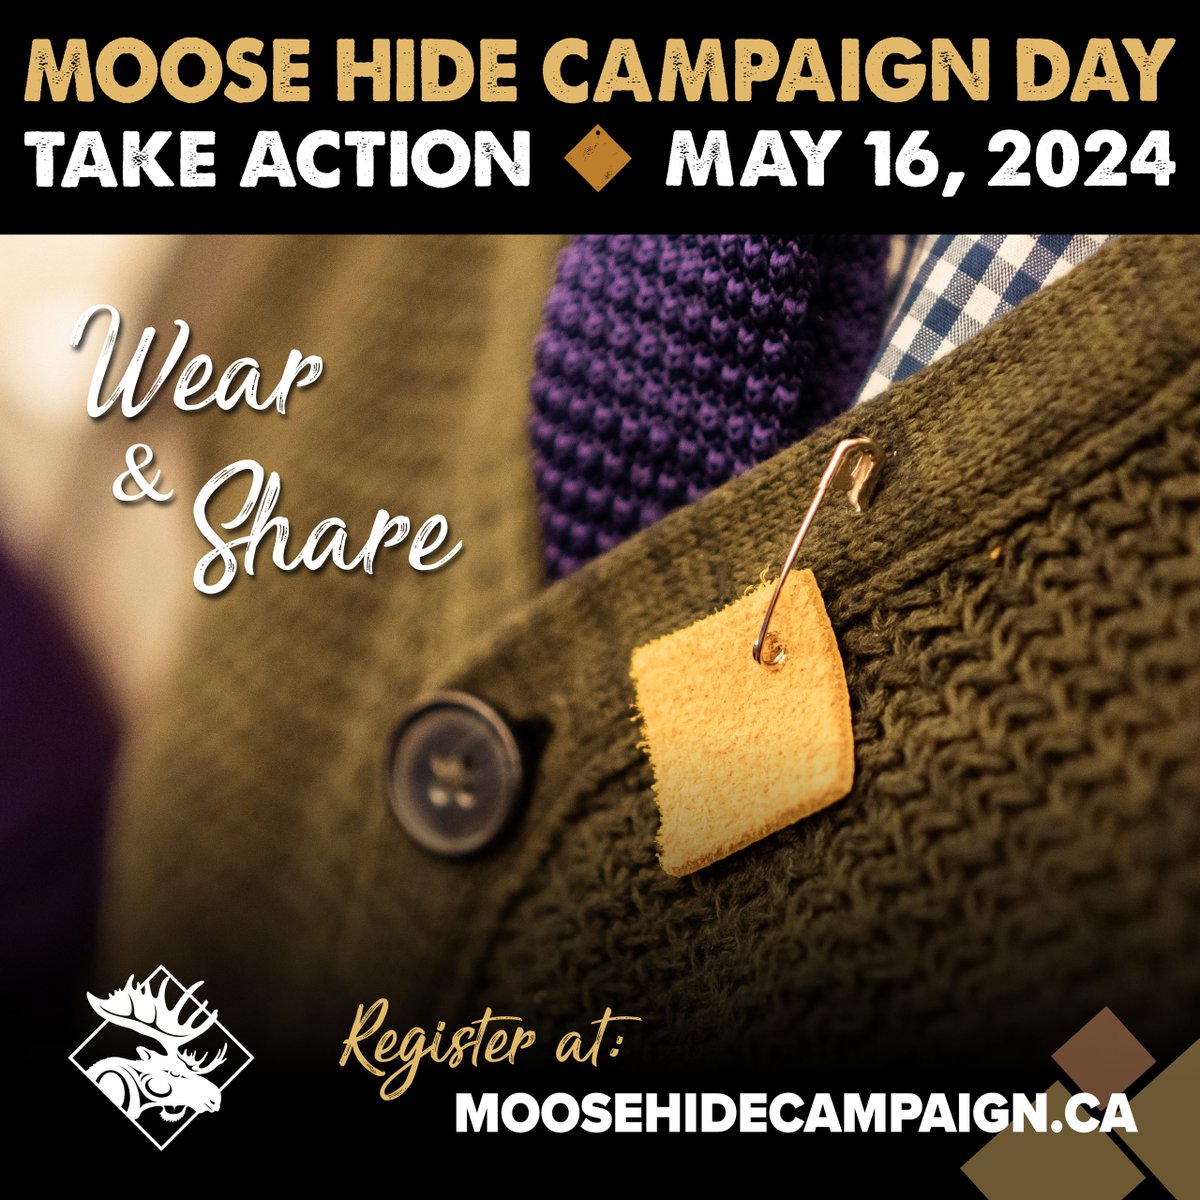 Take a stand against gender-based violence! Send photos of you and your colleagues wearing your Moose Hide Pins to communications@iatse.com! Members can pick up pins at the Union Hall reception desk now until #MooseHideCampaignDay on May 16! Learn more at moosehidecampaign.ca